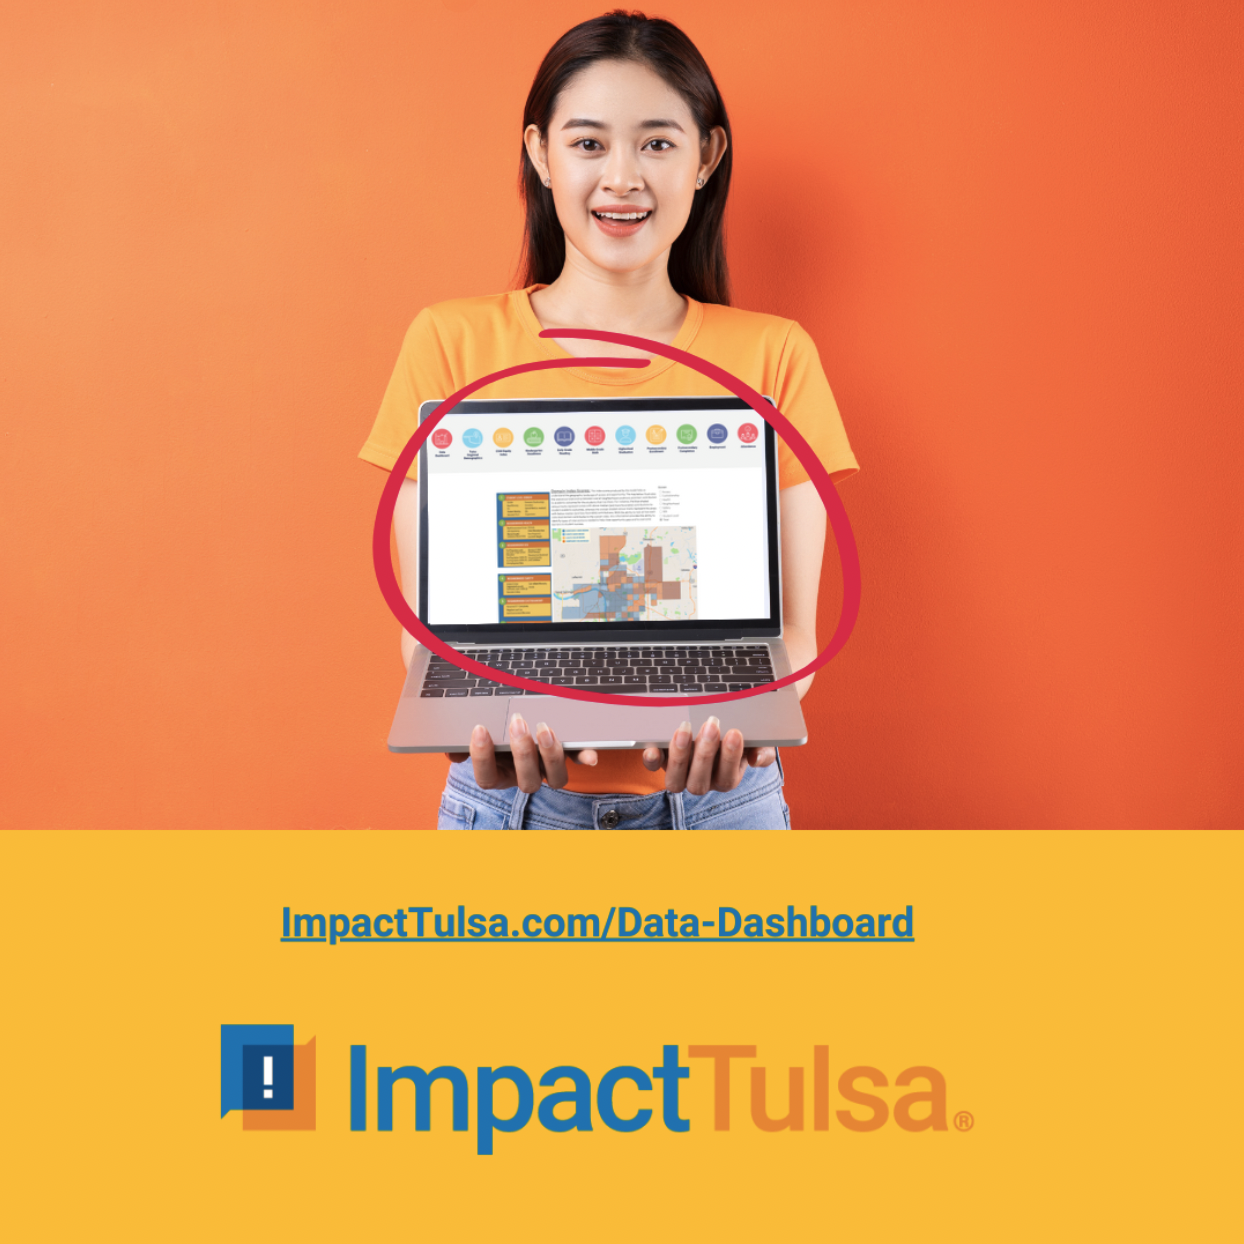 A teen girl holding up a laptop displaying Impact Tulsa's Data Dashboard.